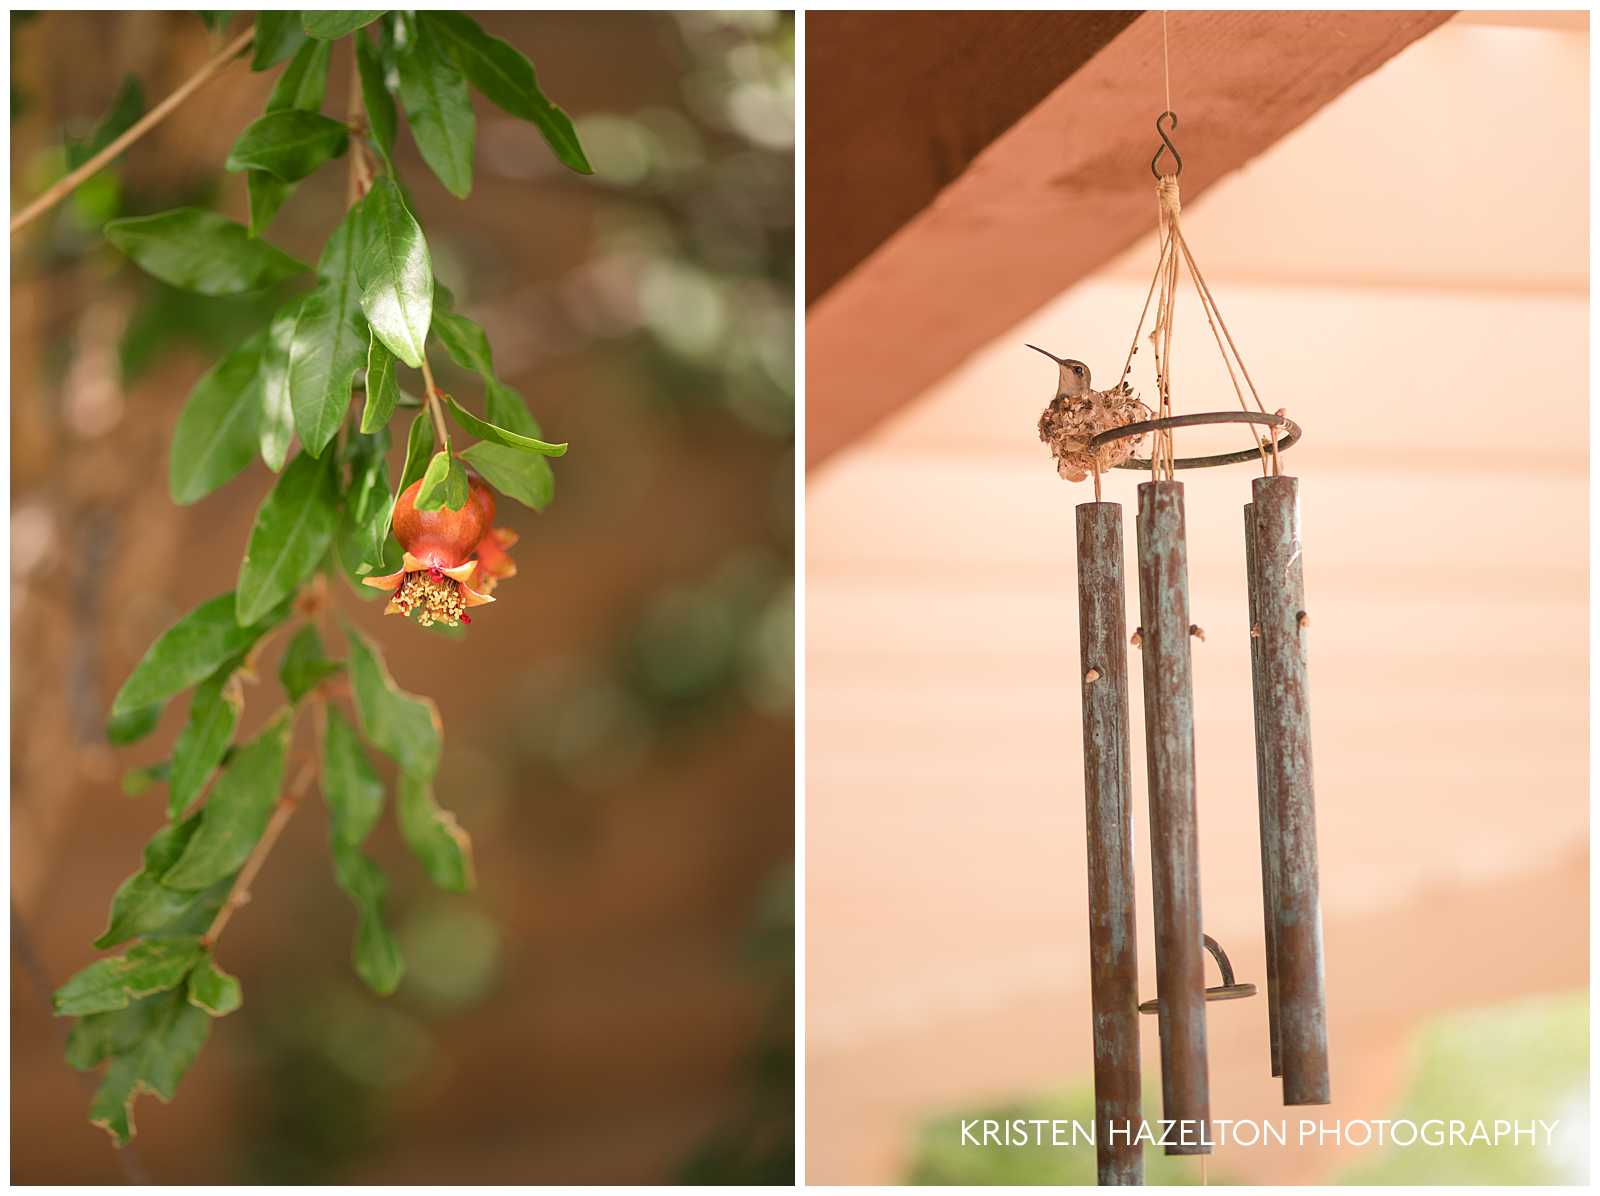 Pomegranate and hummingbird nesting on top of a wind chime